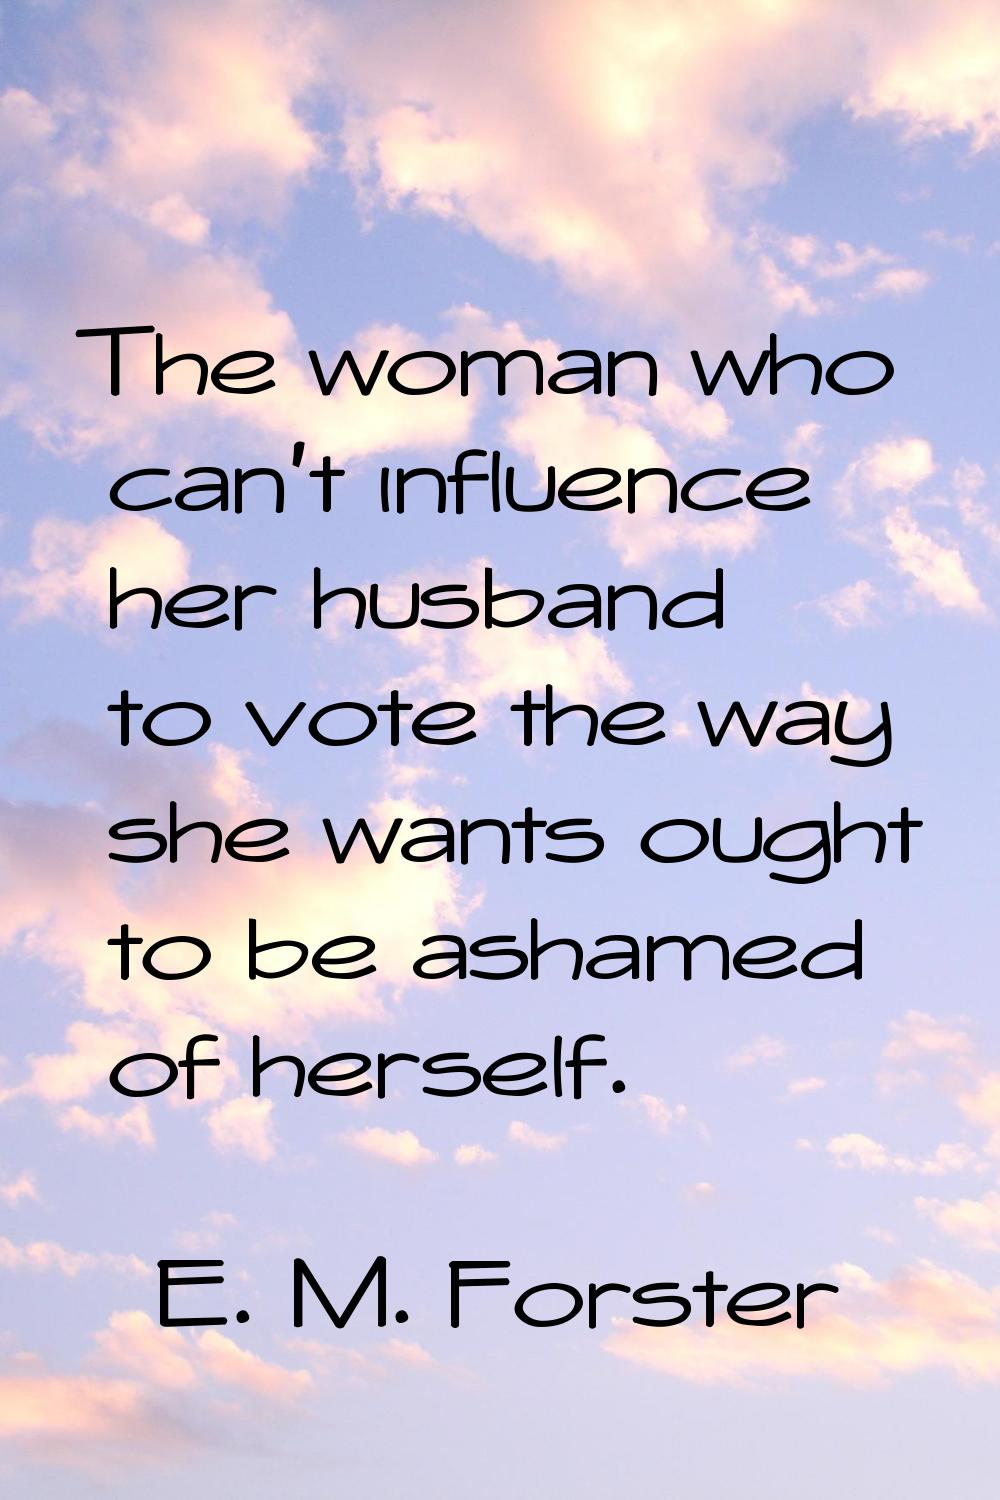 The woman who can't influence her husband to vote the way she wants ought to be ashamed of herself.